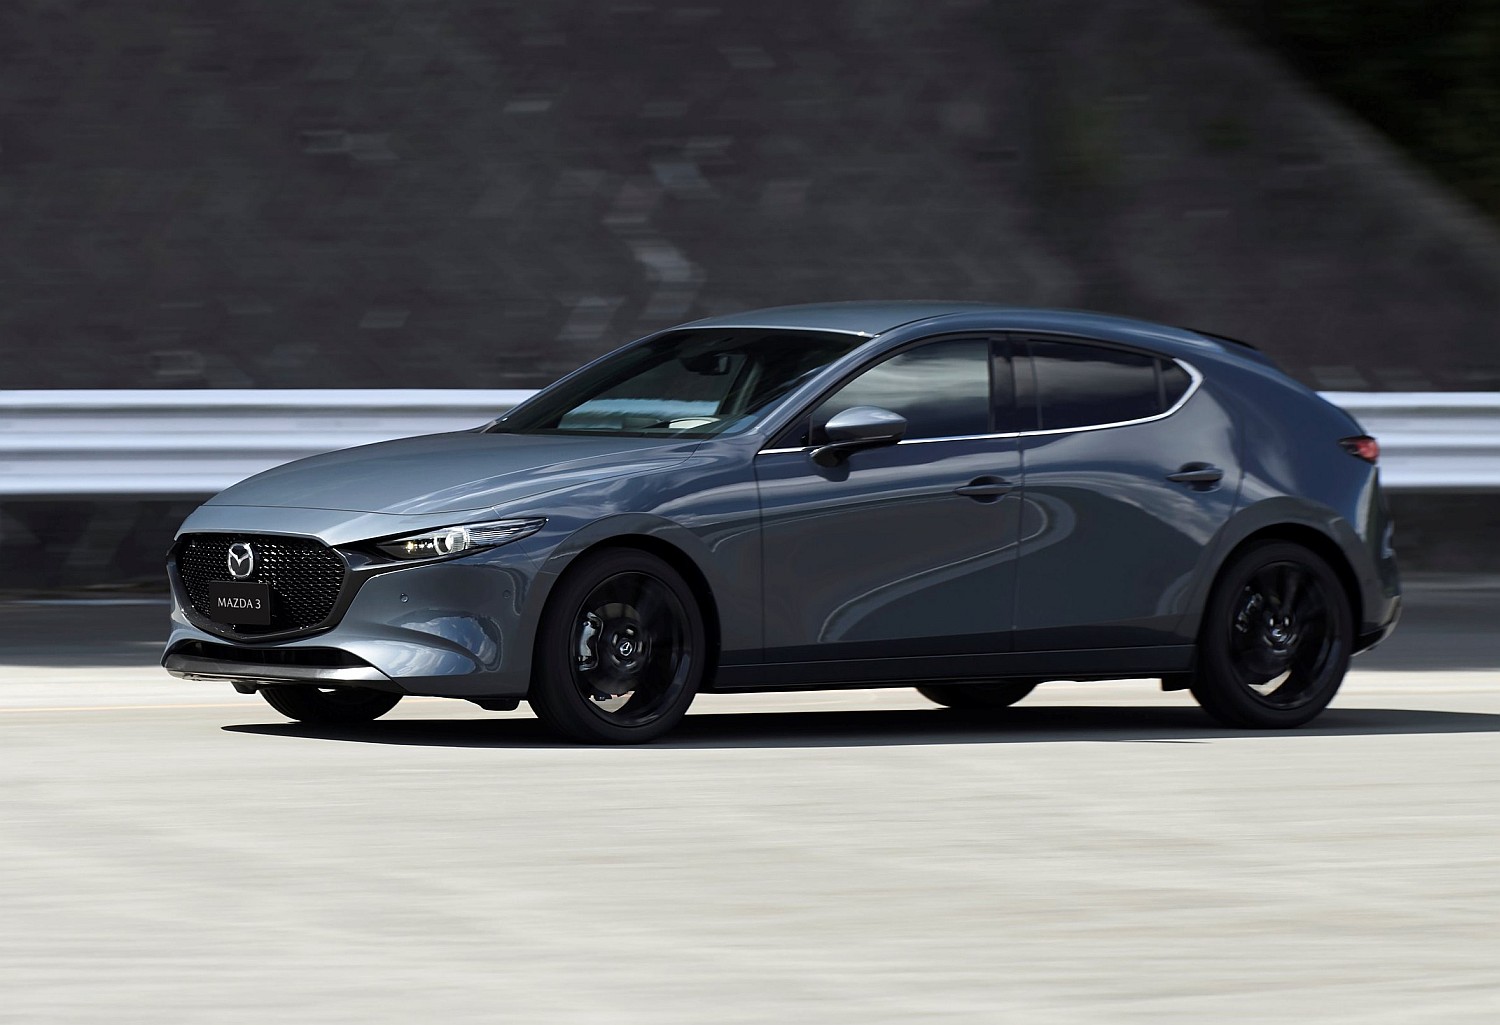 12_All-New-Mazda3_5HB_EXT_Polymetal-Gray-Metallic_lowres